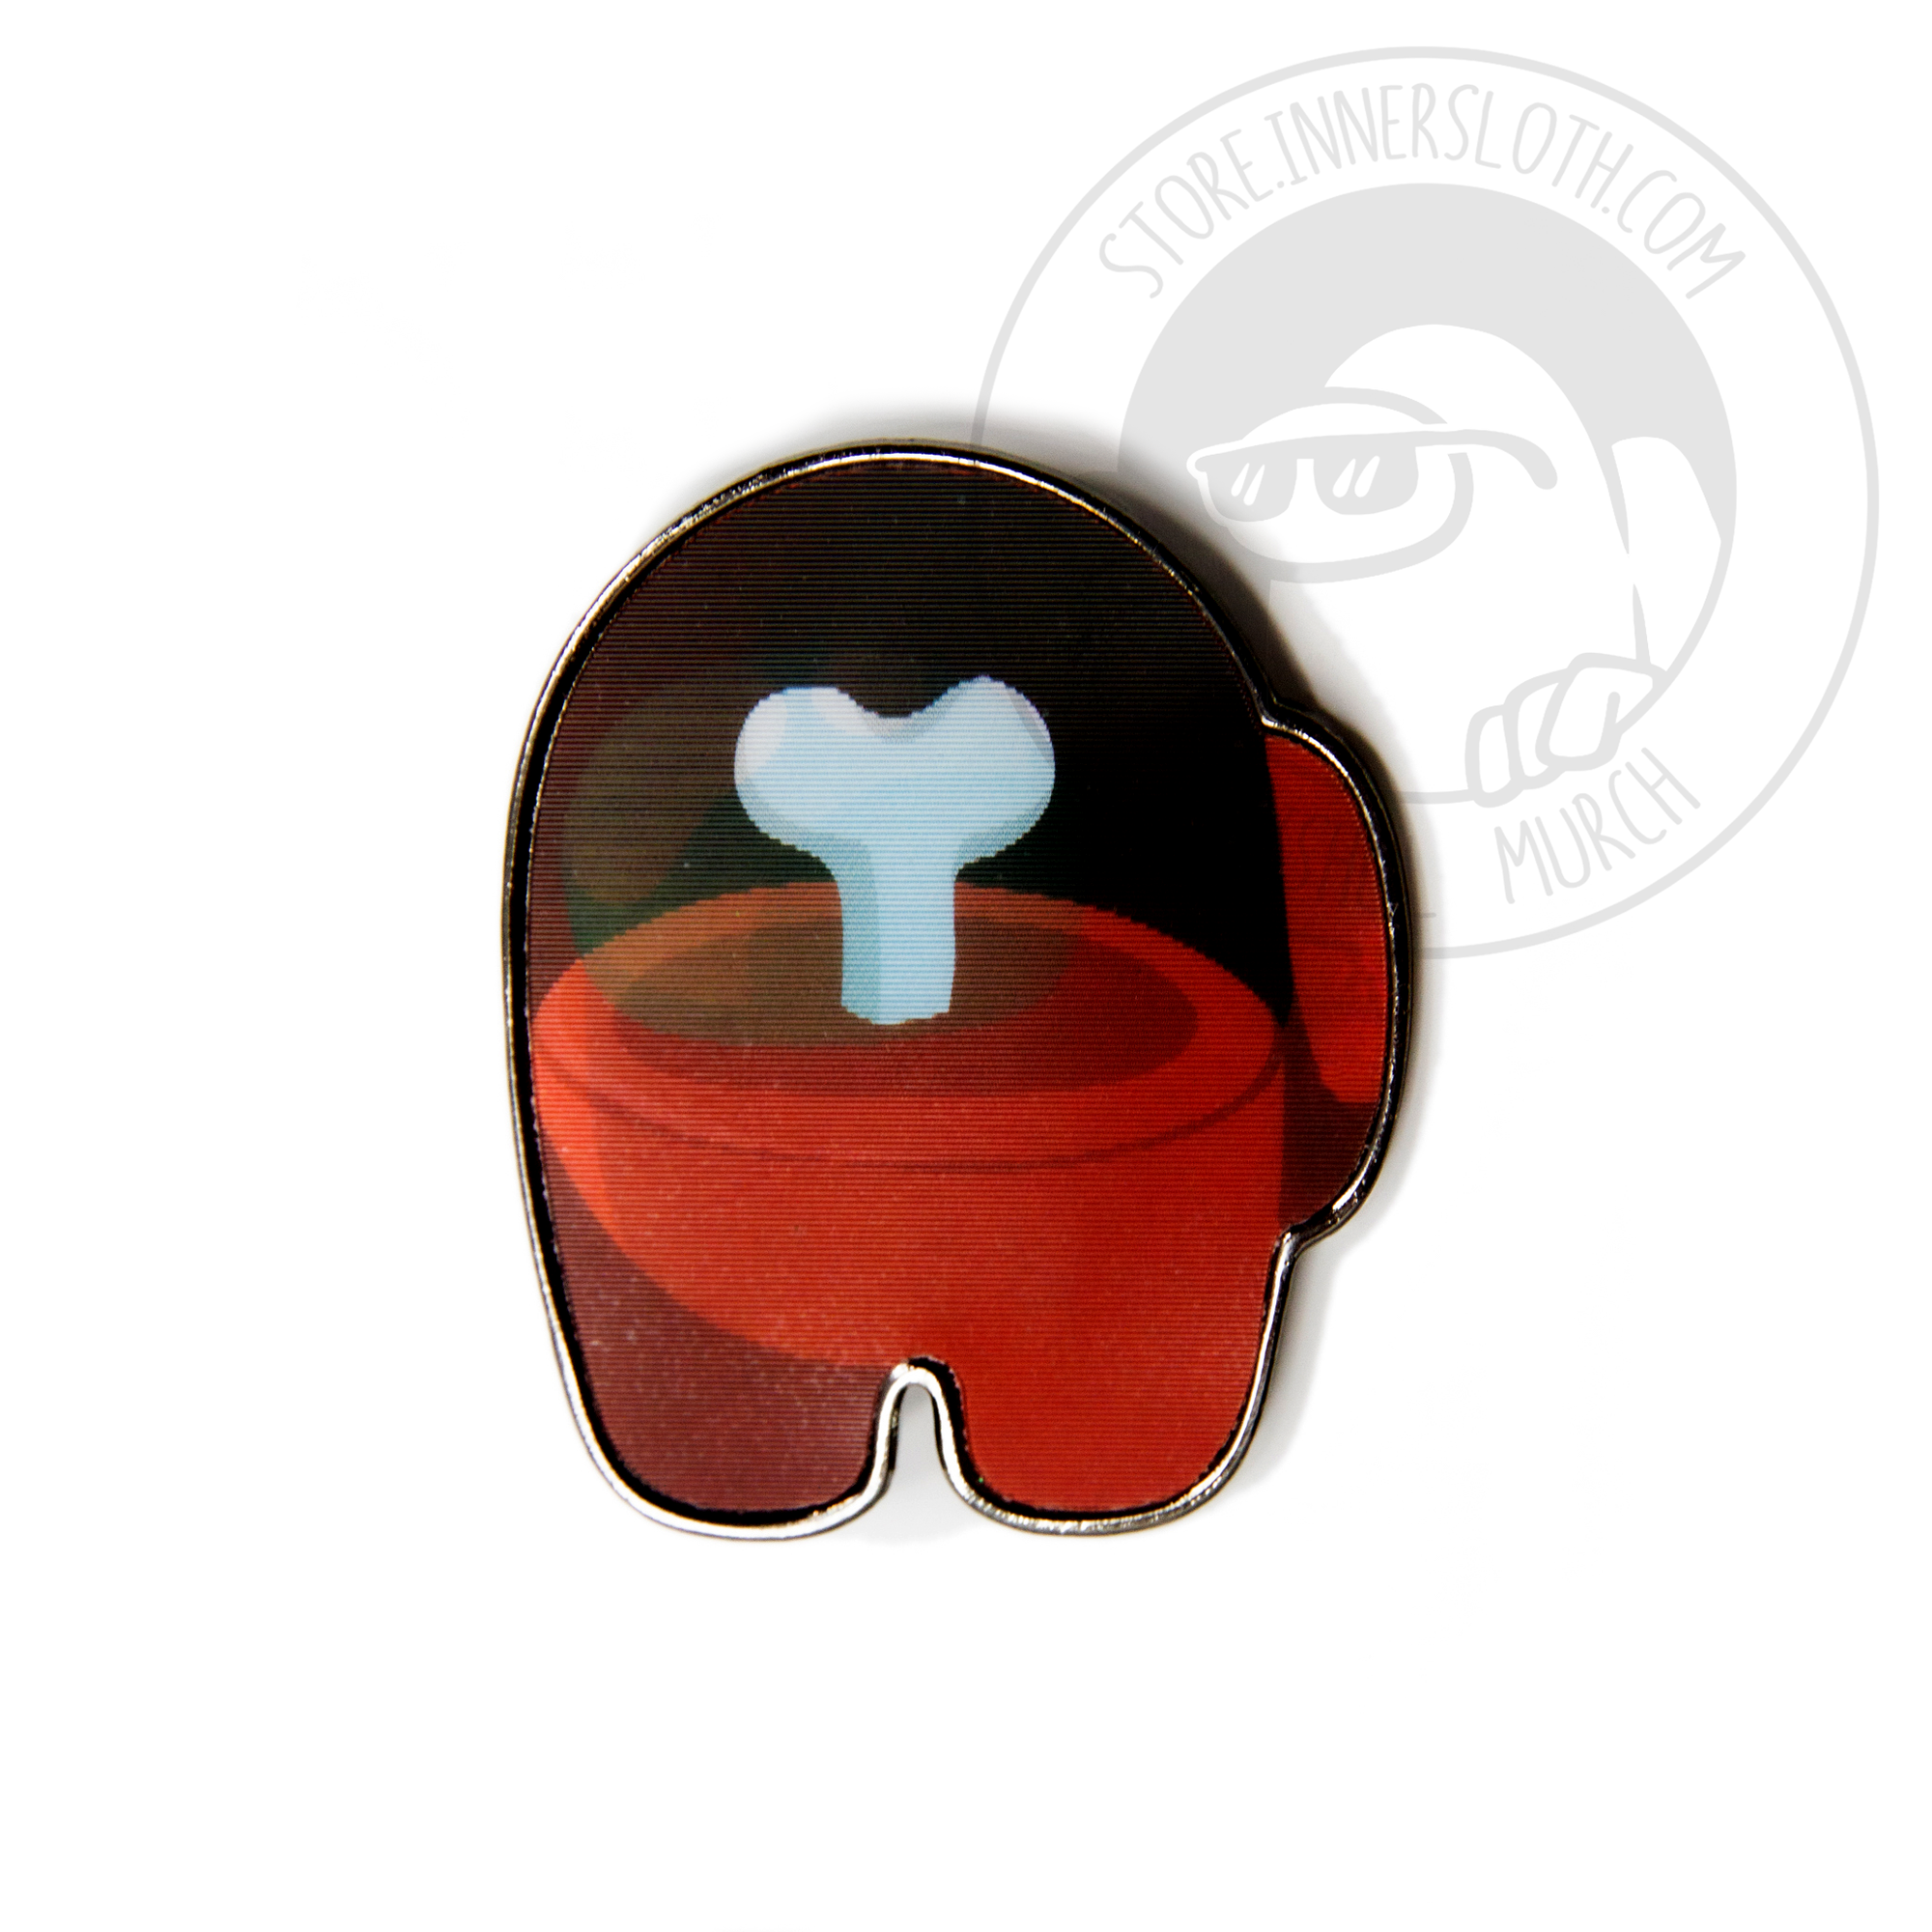 An animated gif of the lenticular crewmate pin, which shows a red crewmate. The image dissolves back and forth showing the red crewmate, and then half the red crewmate with its bone sticking out.